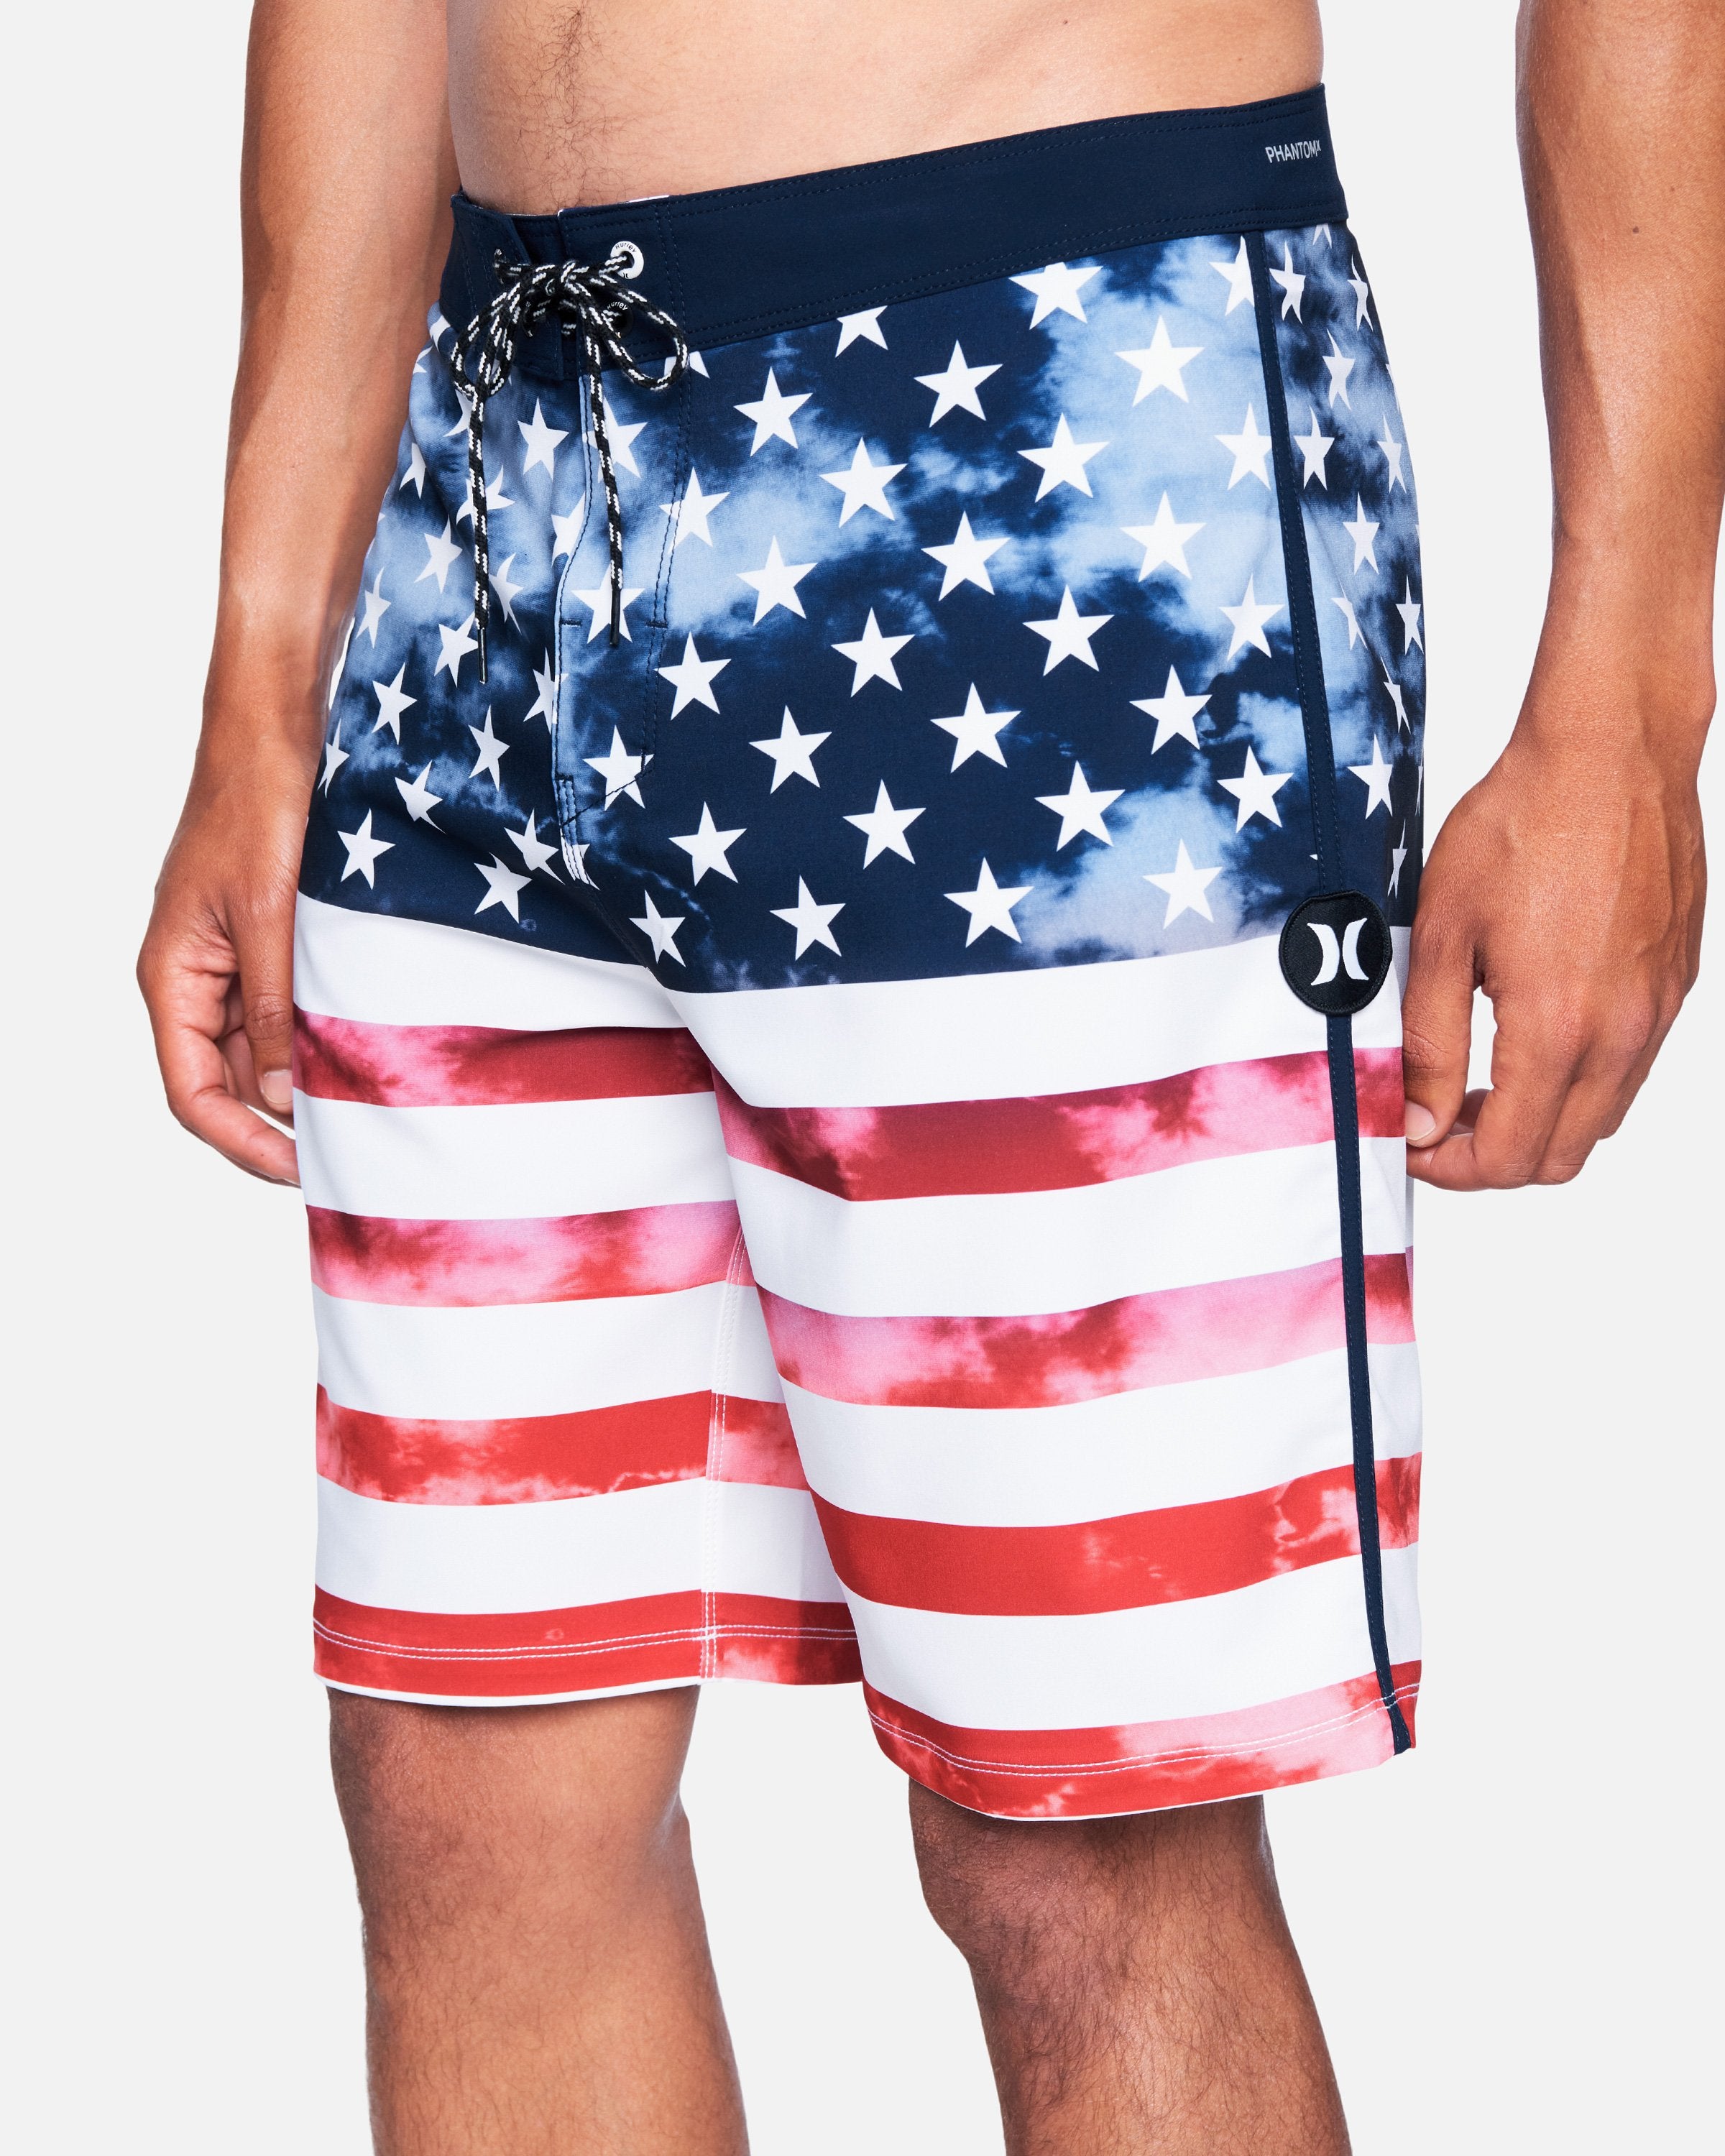 Mens Boardshorts - Now Made for Non-Nude Beaches